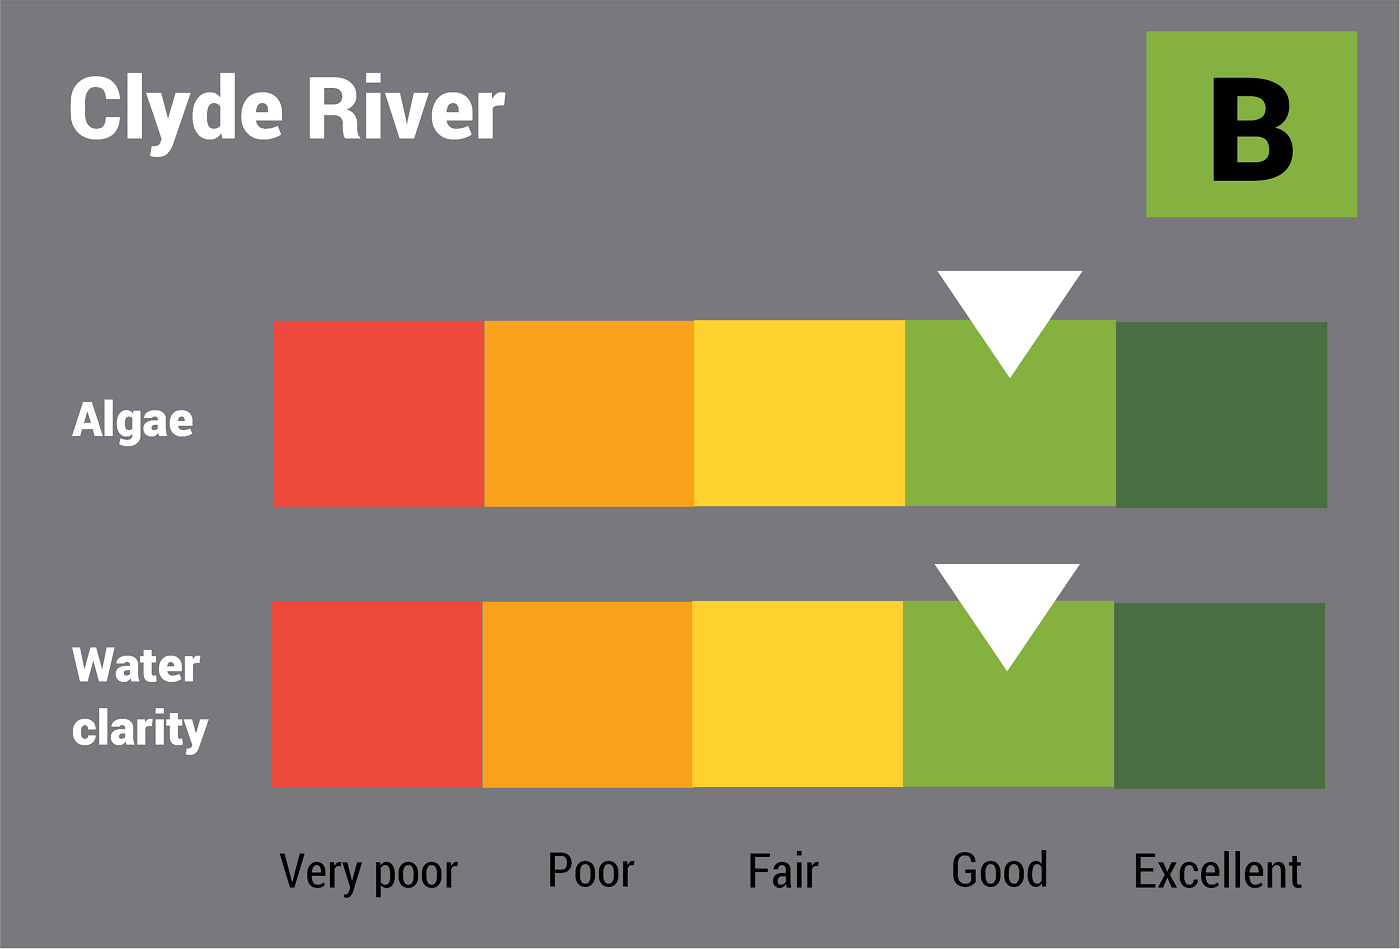 Clyde River water quality report card for algae and water clarity showing colour-coded ratings (red, orange, yellow, light green and dark green, which represent very poor, poor, fair, good and excellent, respectively). Algae is rated 'good' and water clarity is rated 'good' giving an overall rating of 'good' or 'B'.